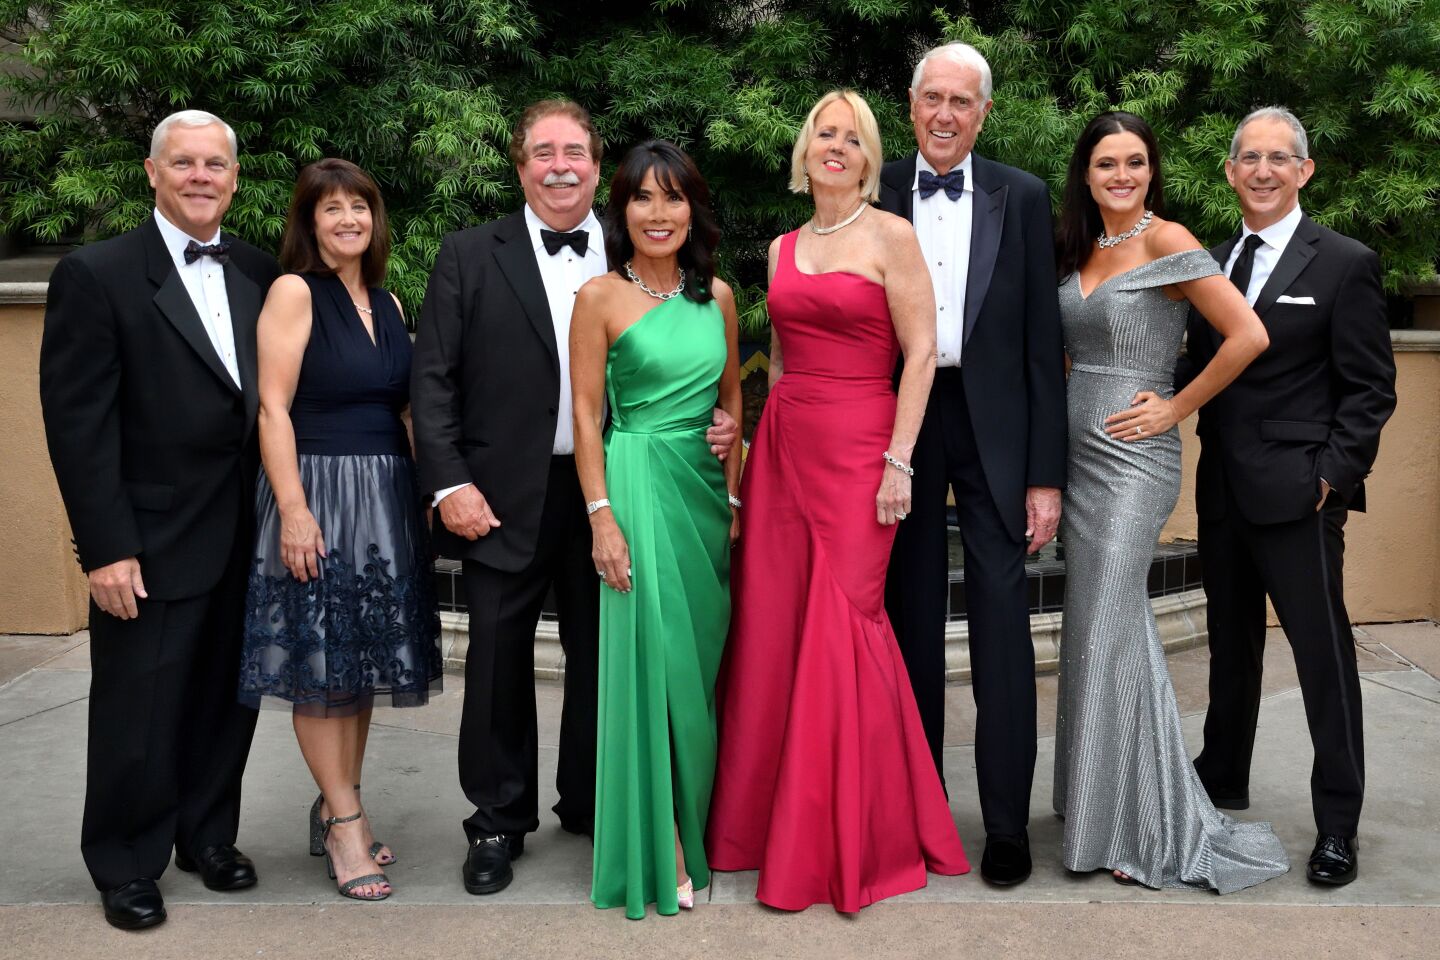 Tim and Kim Shields (he's Globe managing director), Dr. Richard and Jennifer Greenfield (she's gala co-chair), Sheryl and Harvey White (she's gala co-chair), Hilit and Barry Edelstein (he's Globe artistic director)